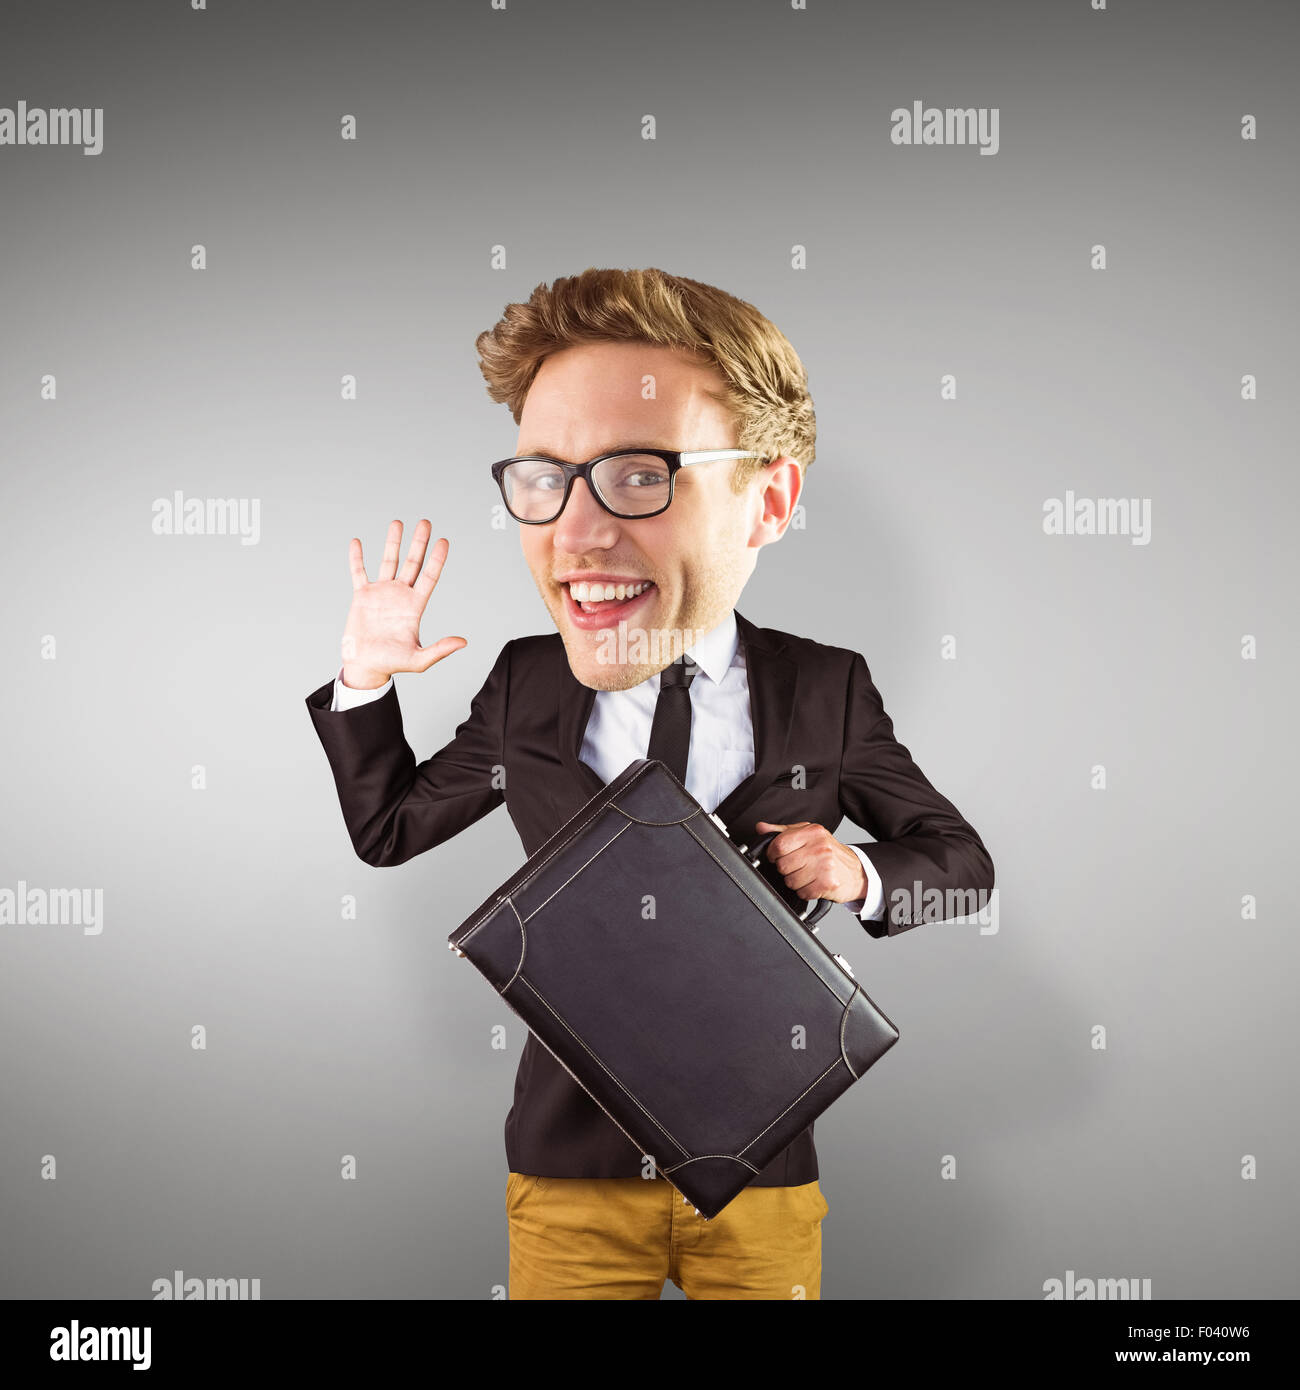 Composite image of nerd smiling and waving Stock Photo